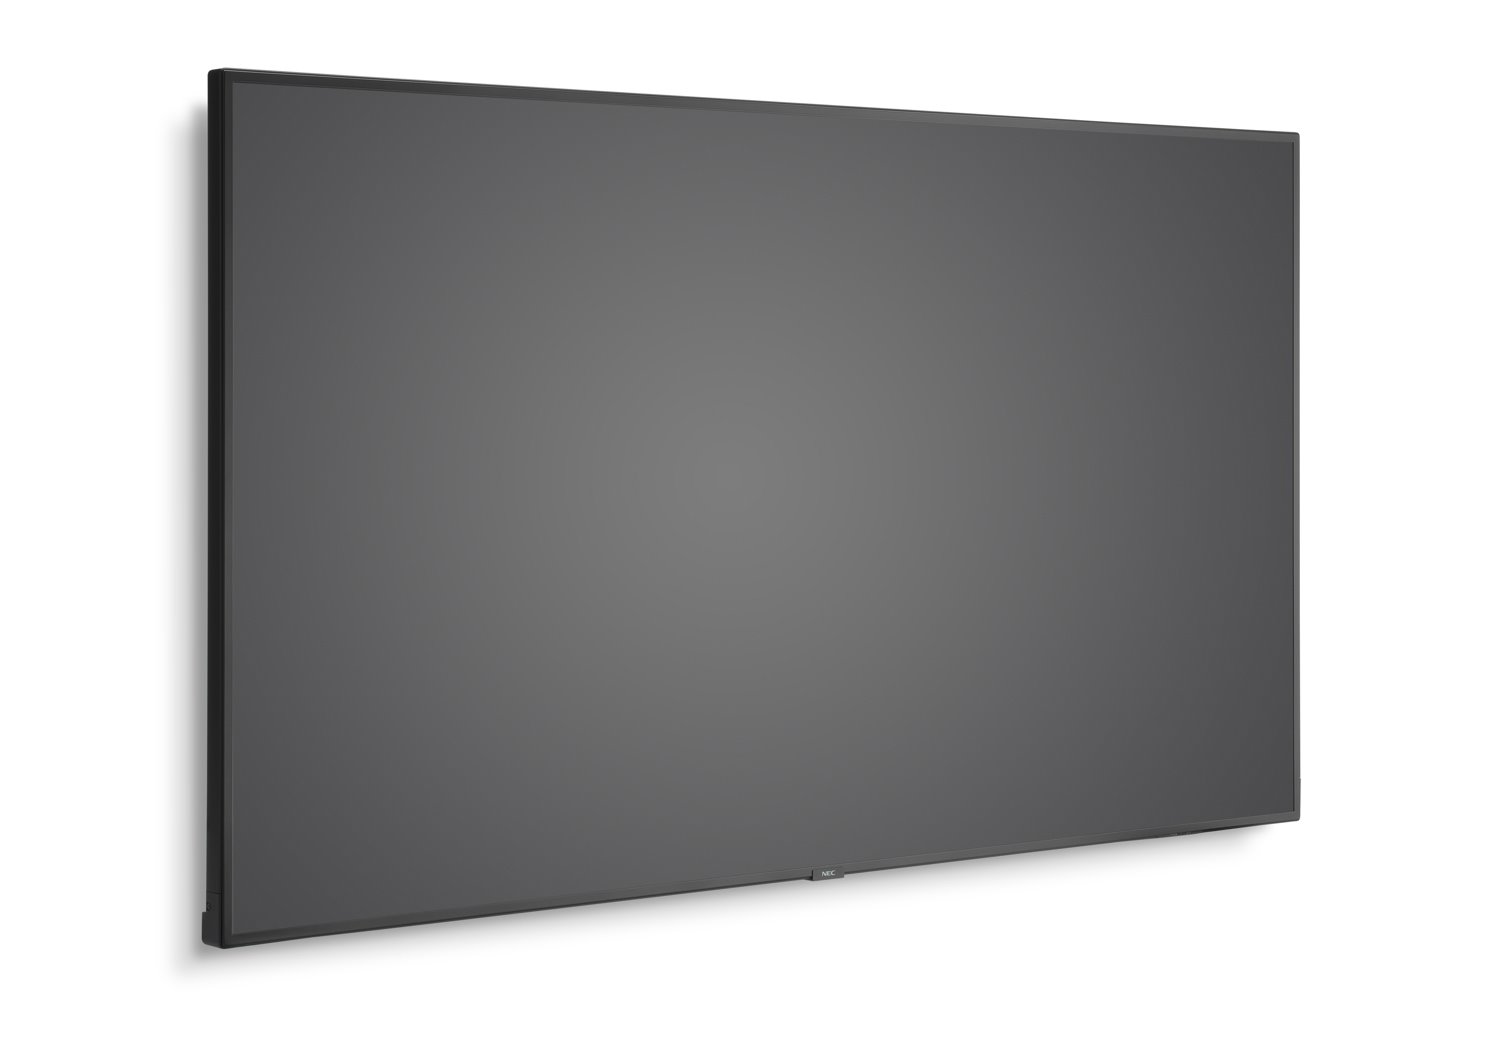 NEC Display 98" Ultra High Definition Professional Display